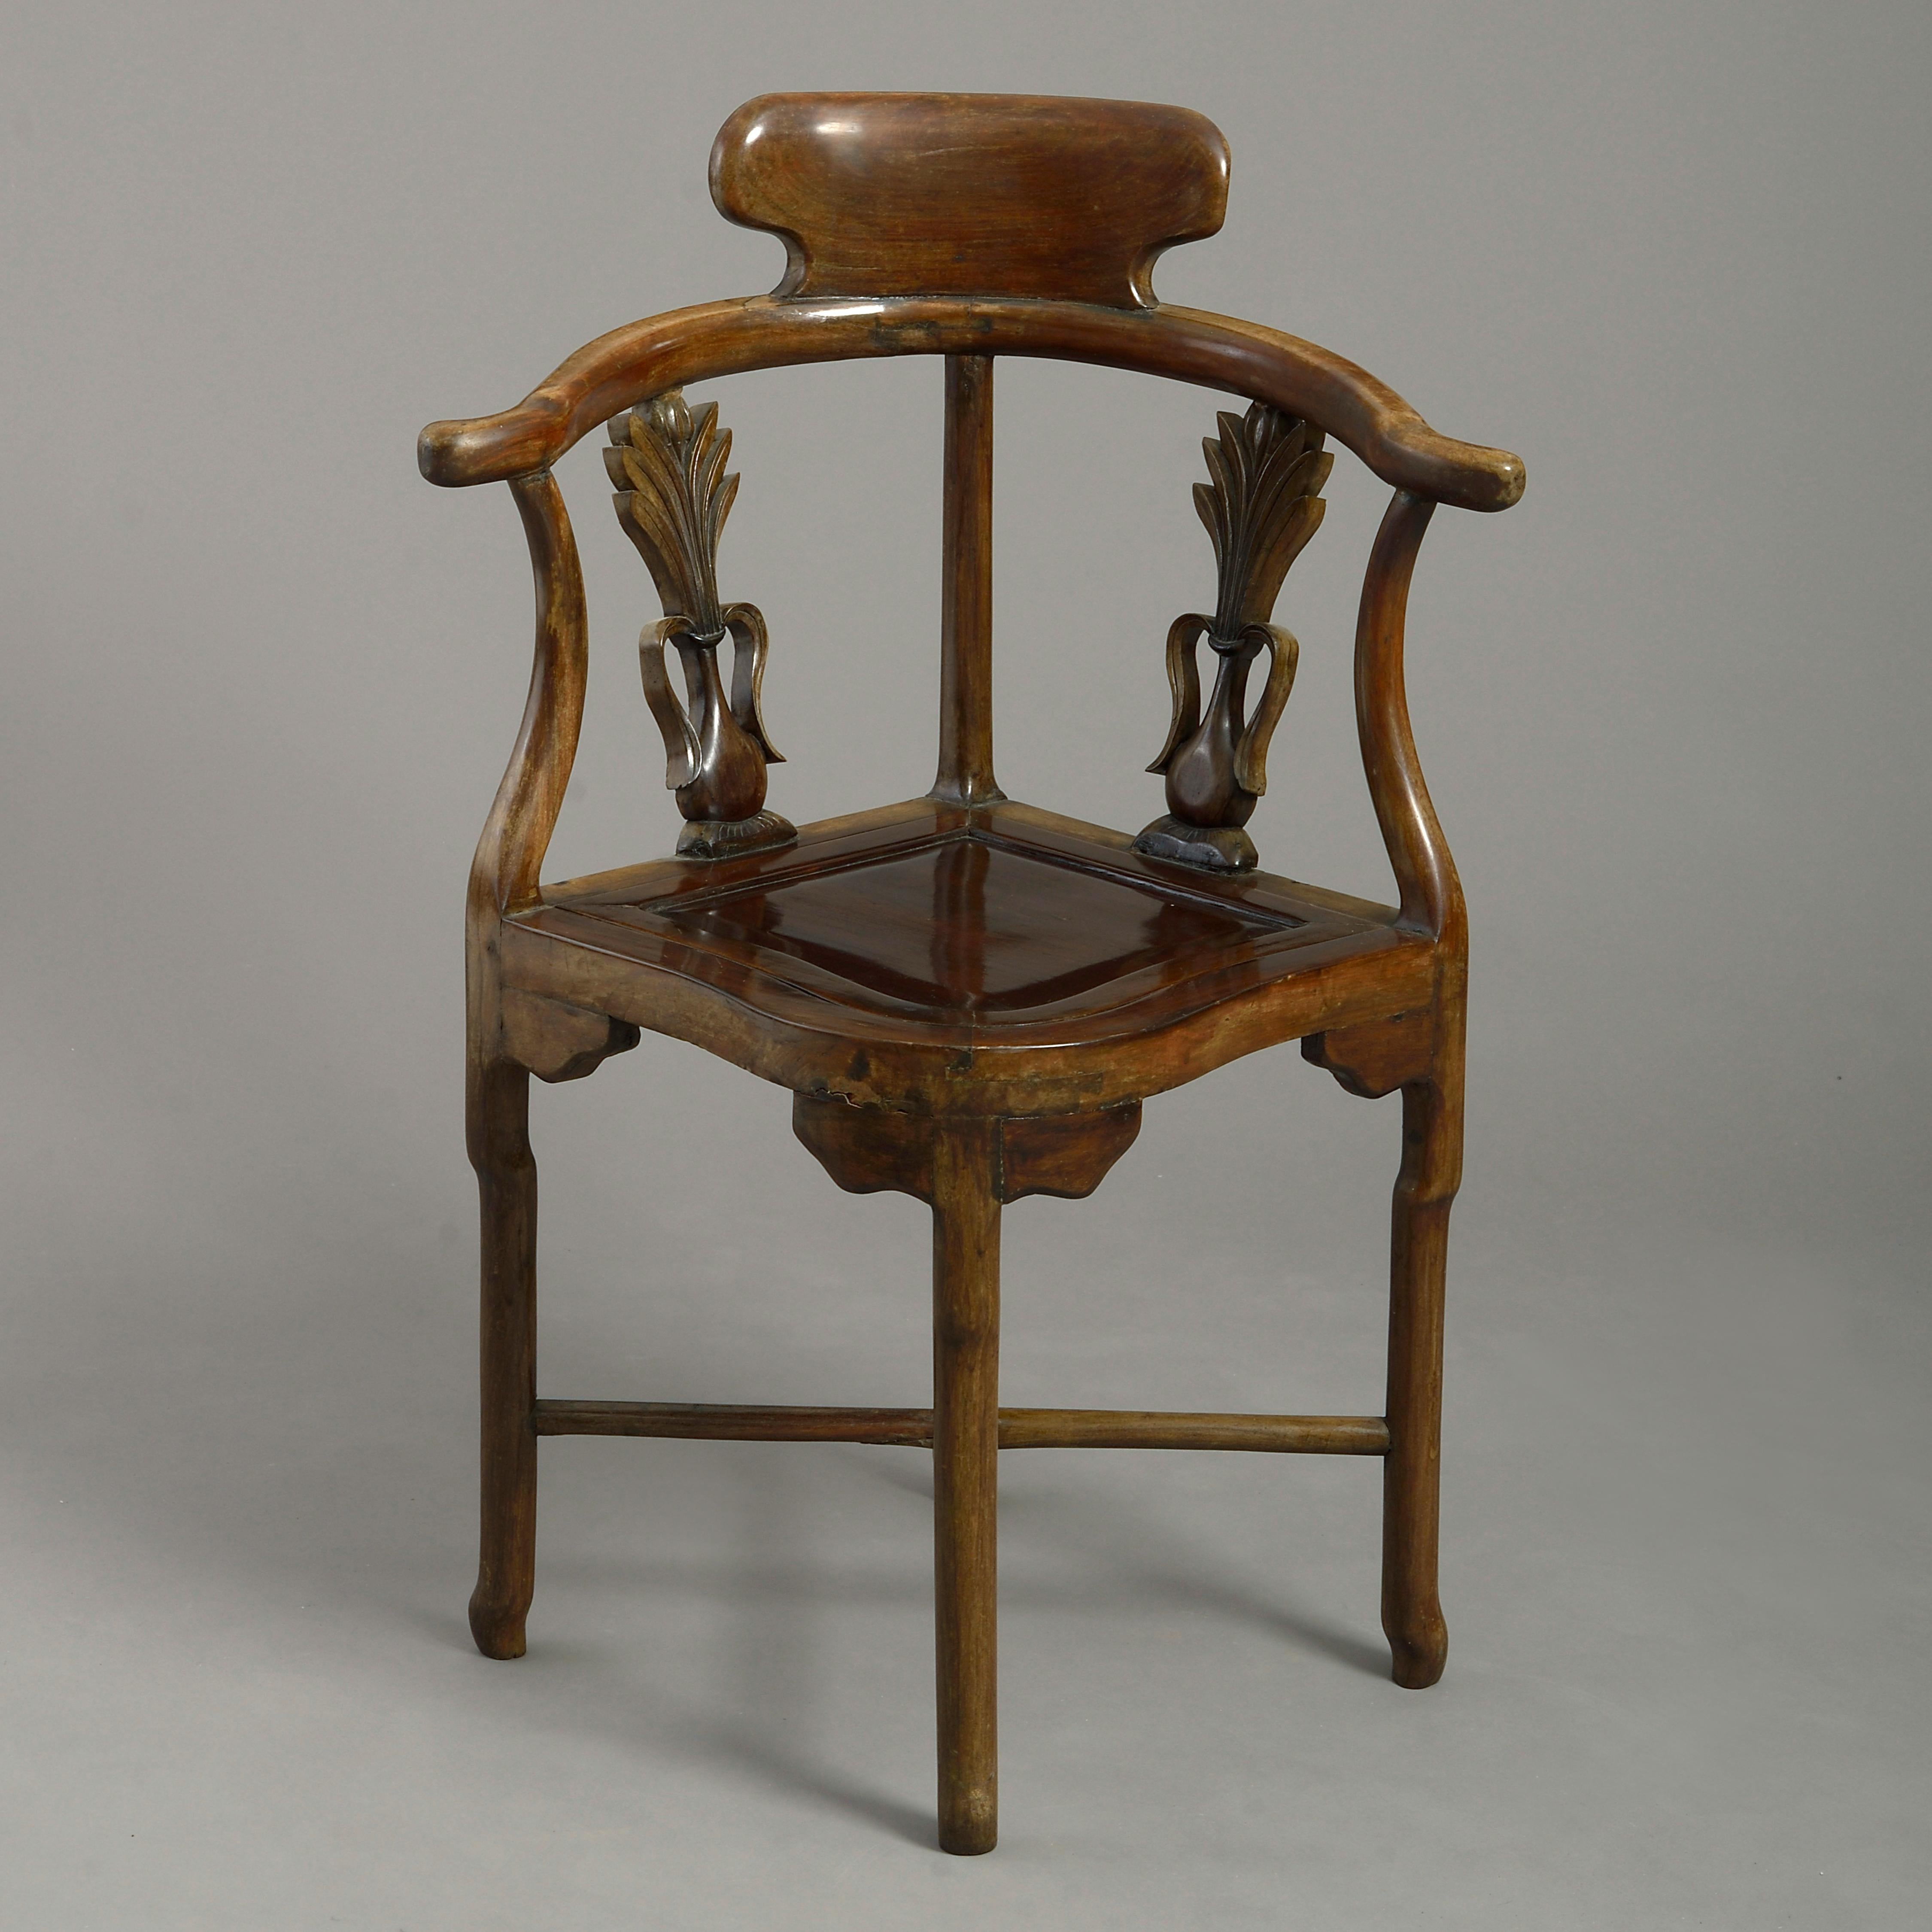 A pair of 19th century hardwood corner armchairs, each having a horseshoe back rail above two carved vase splats with stylized foliage, the drop-in wooden seats all raised on shaped legs with X-form stretchers.